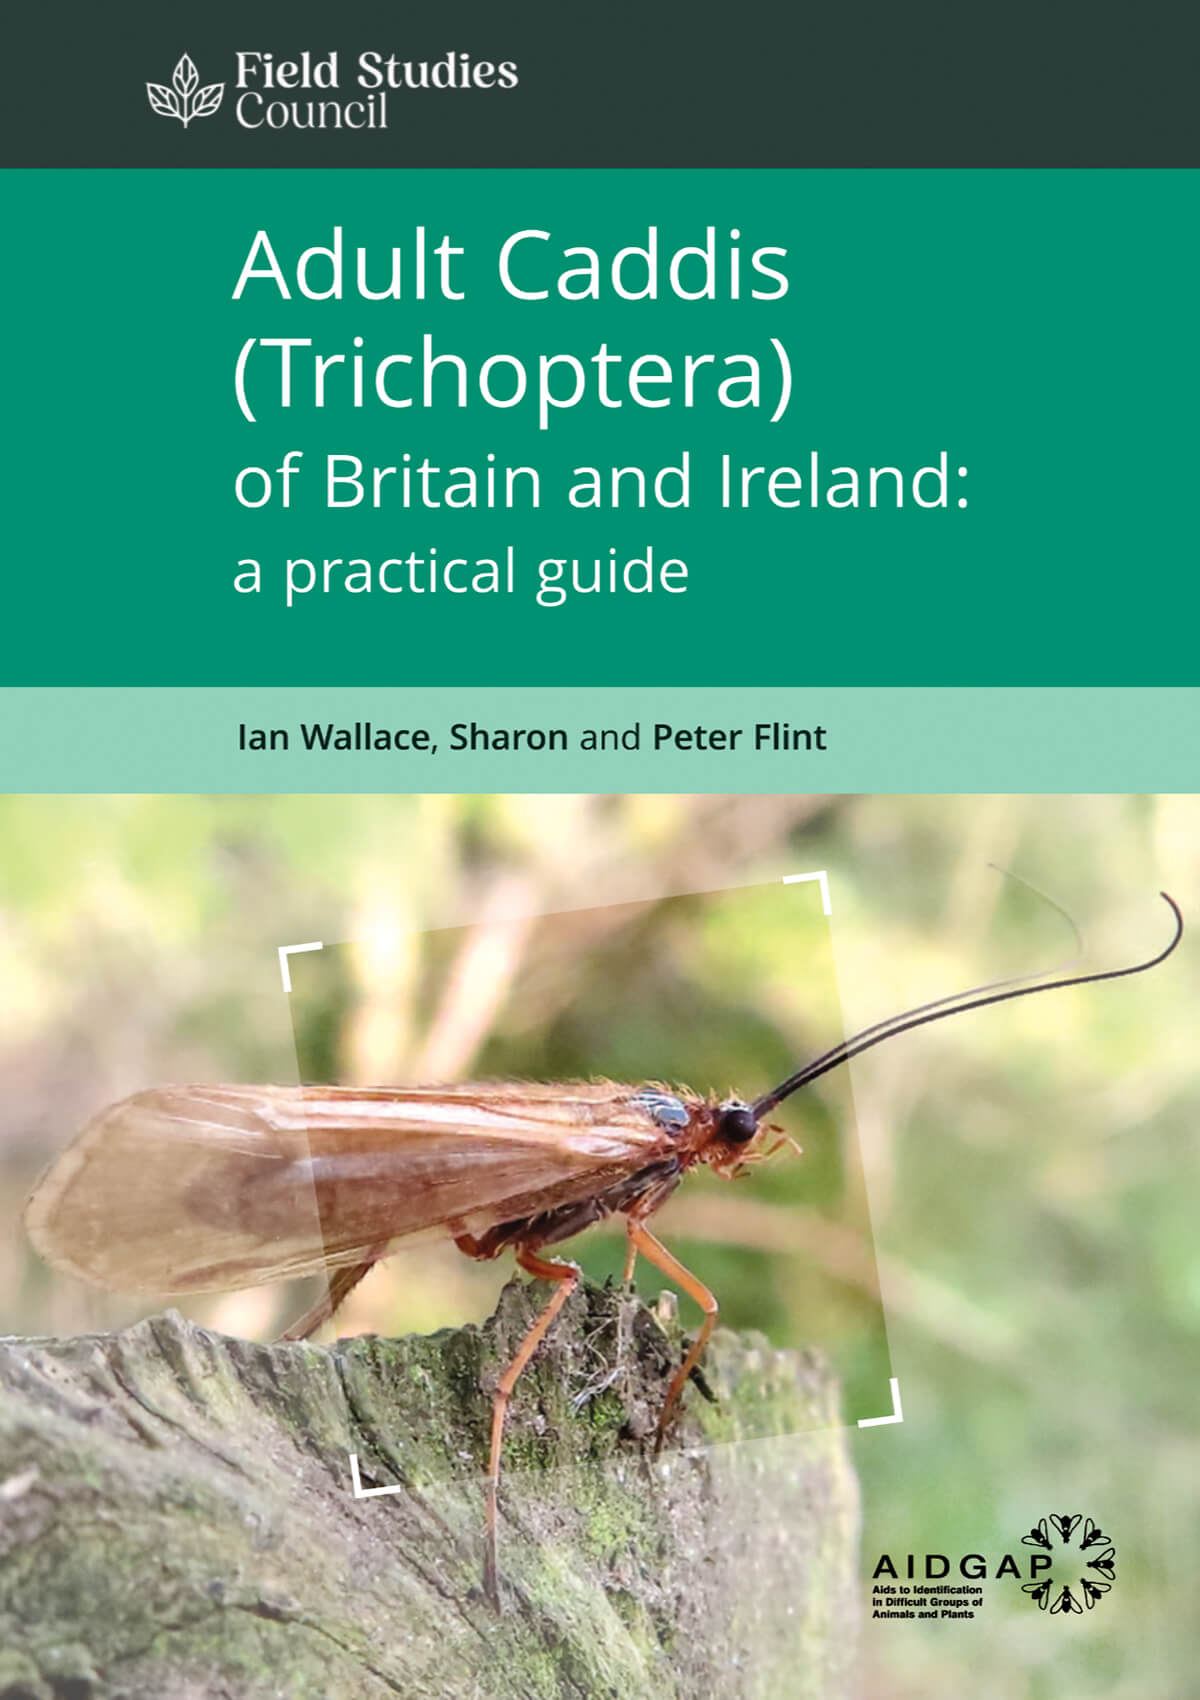 Cover of the book Adult Caddis (Trichoptera) of Britain and Ireland: a practical guide, showing an adult caddisfly